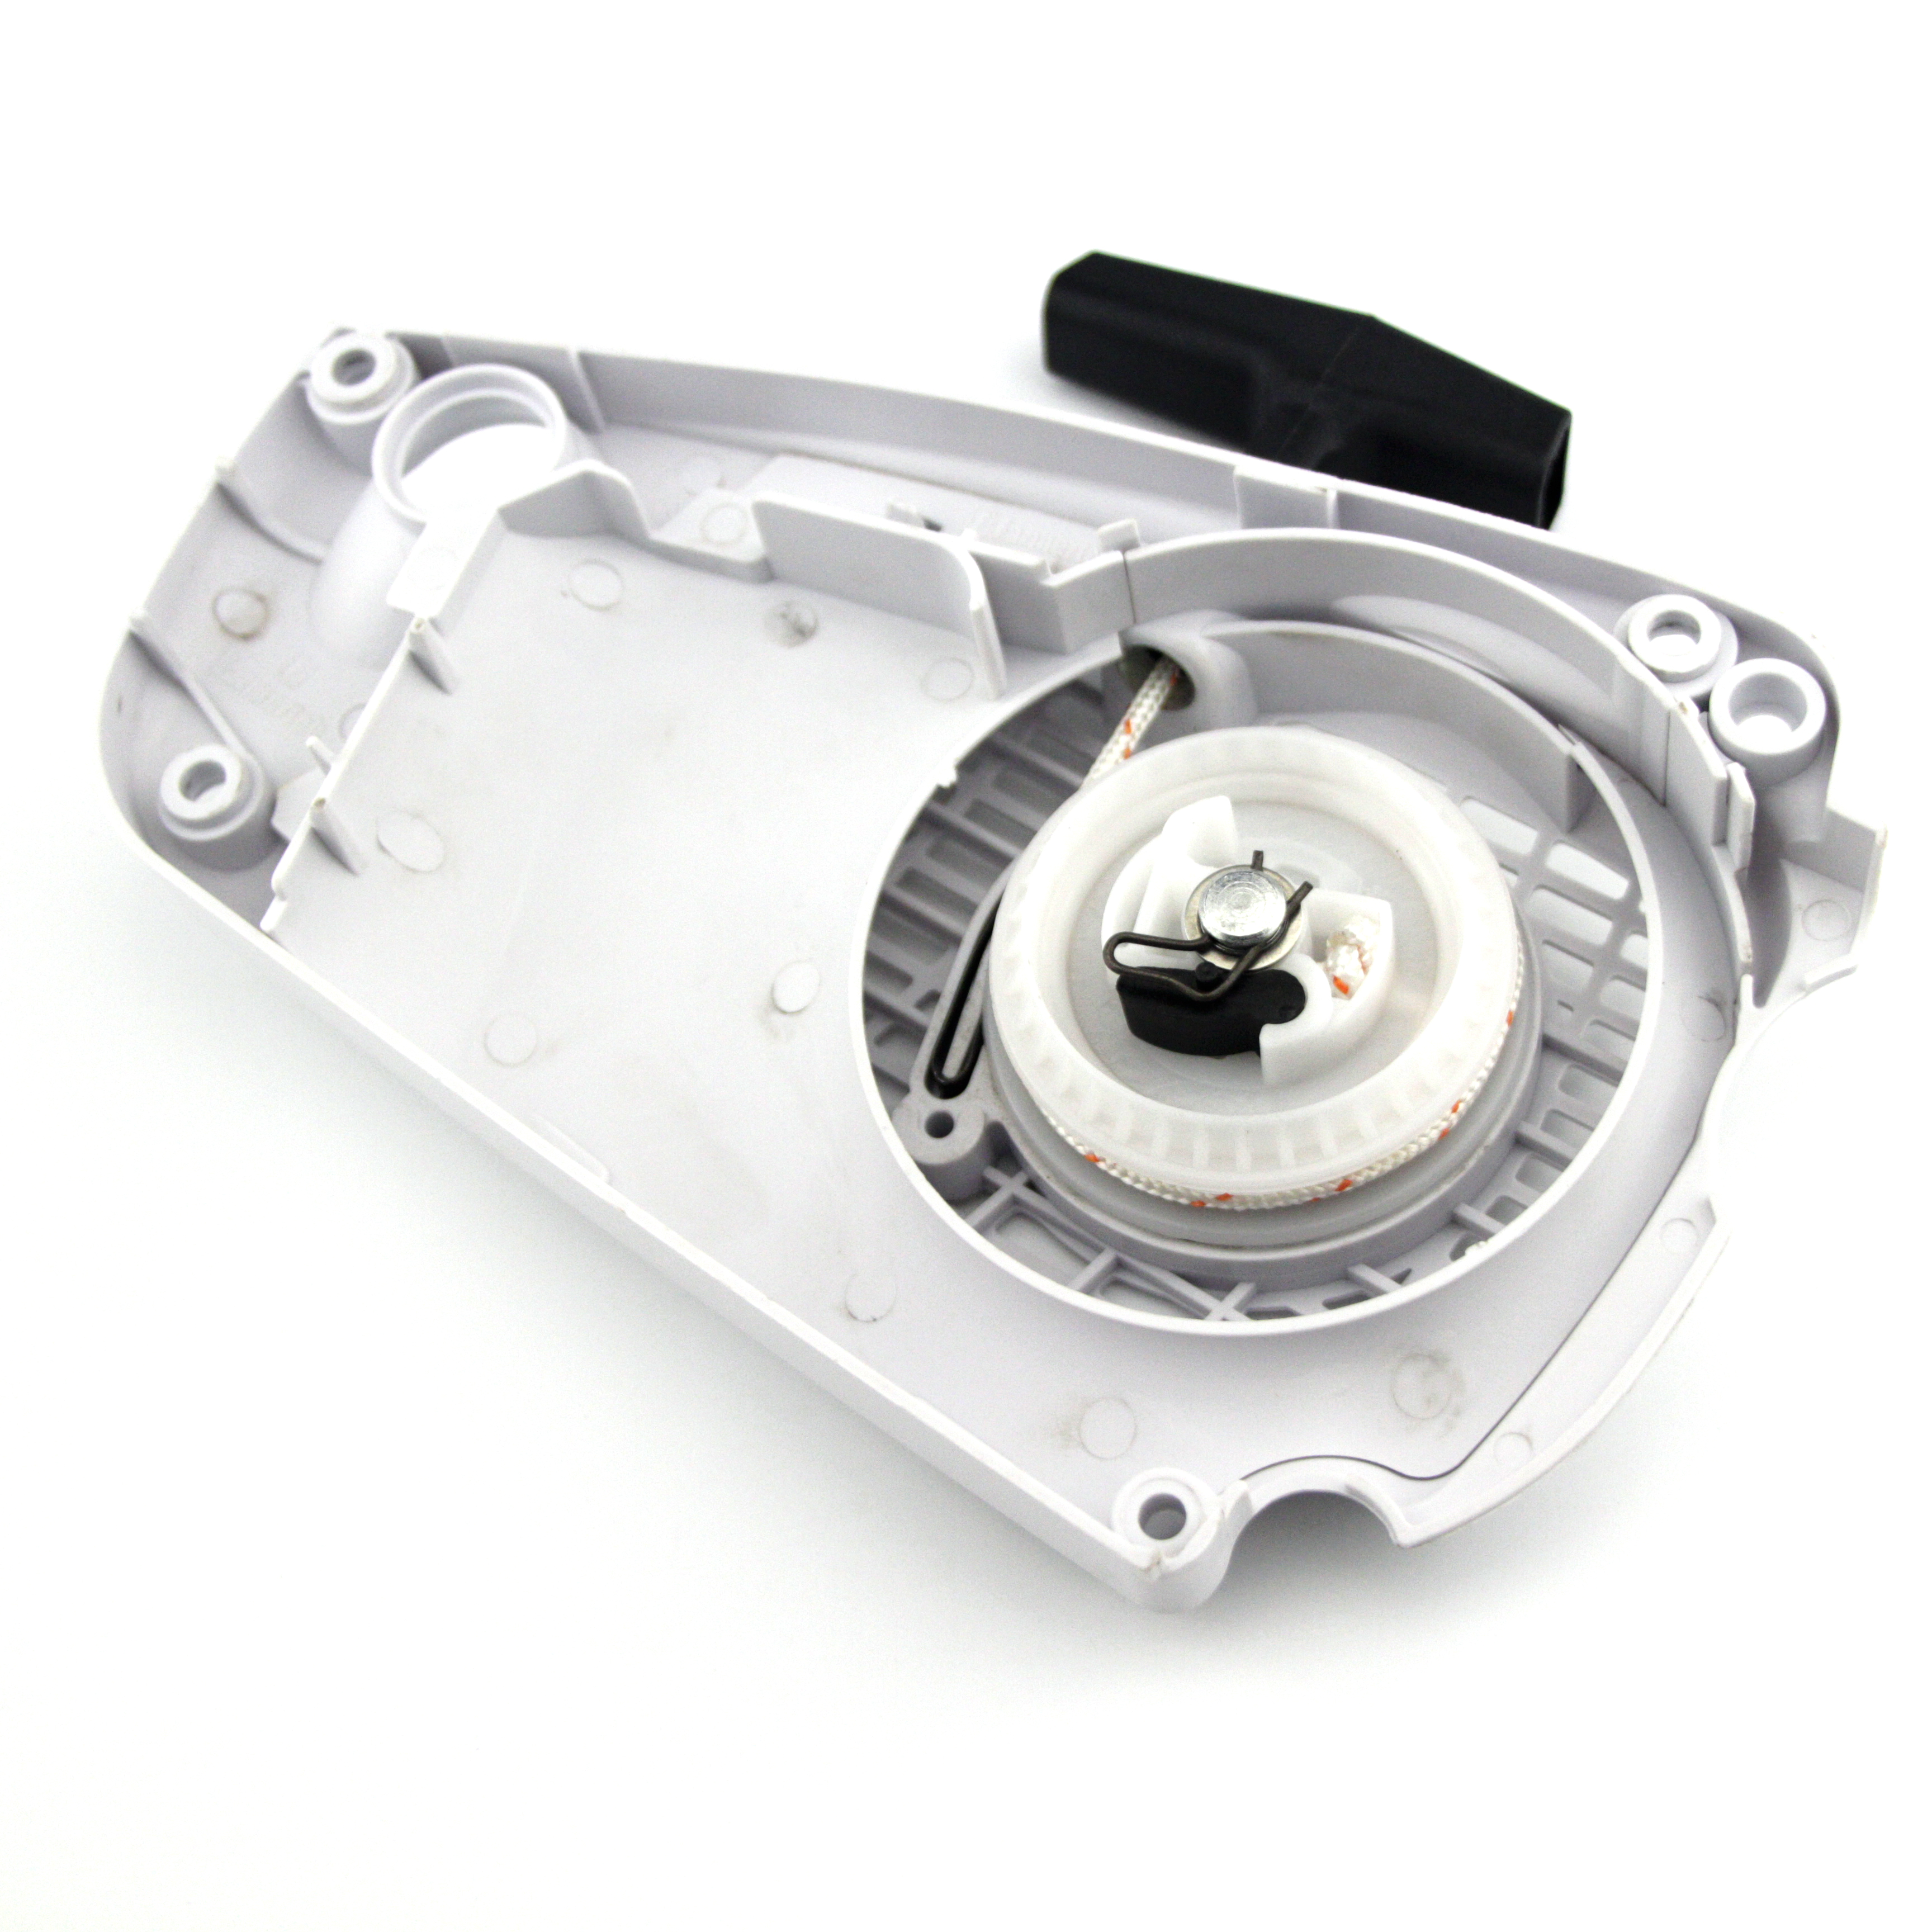 Details about   Chainsaw Machinery Spare Part Recoil Starter For Stihl MS192T MS193T Replacement 